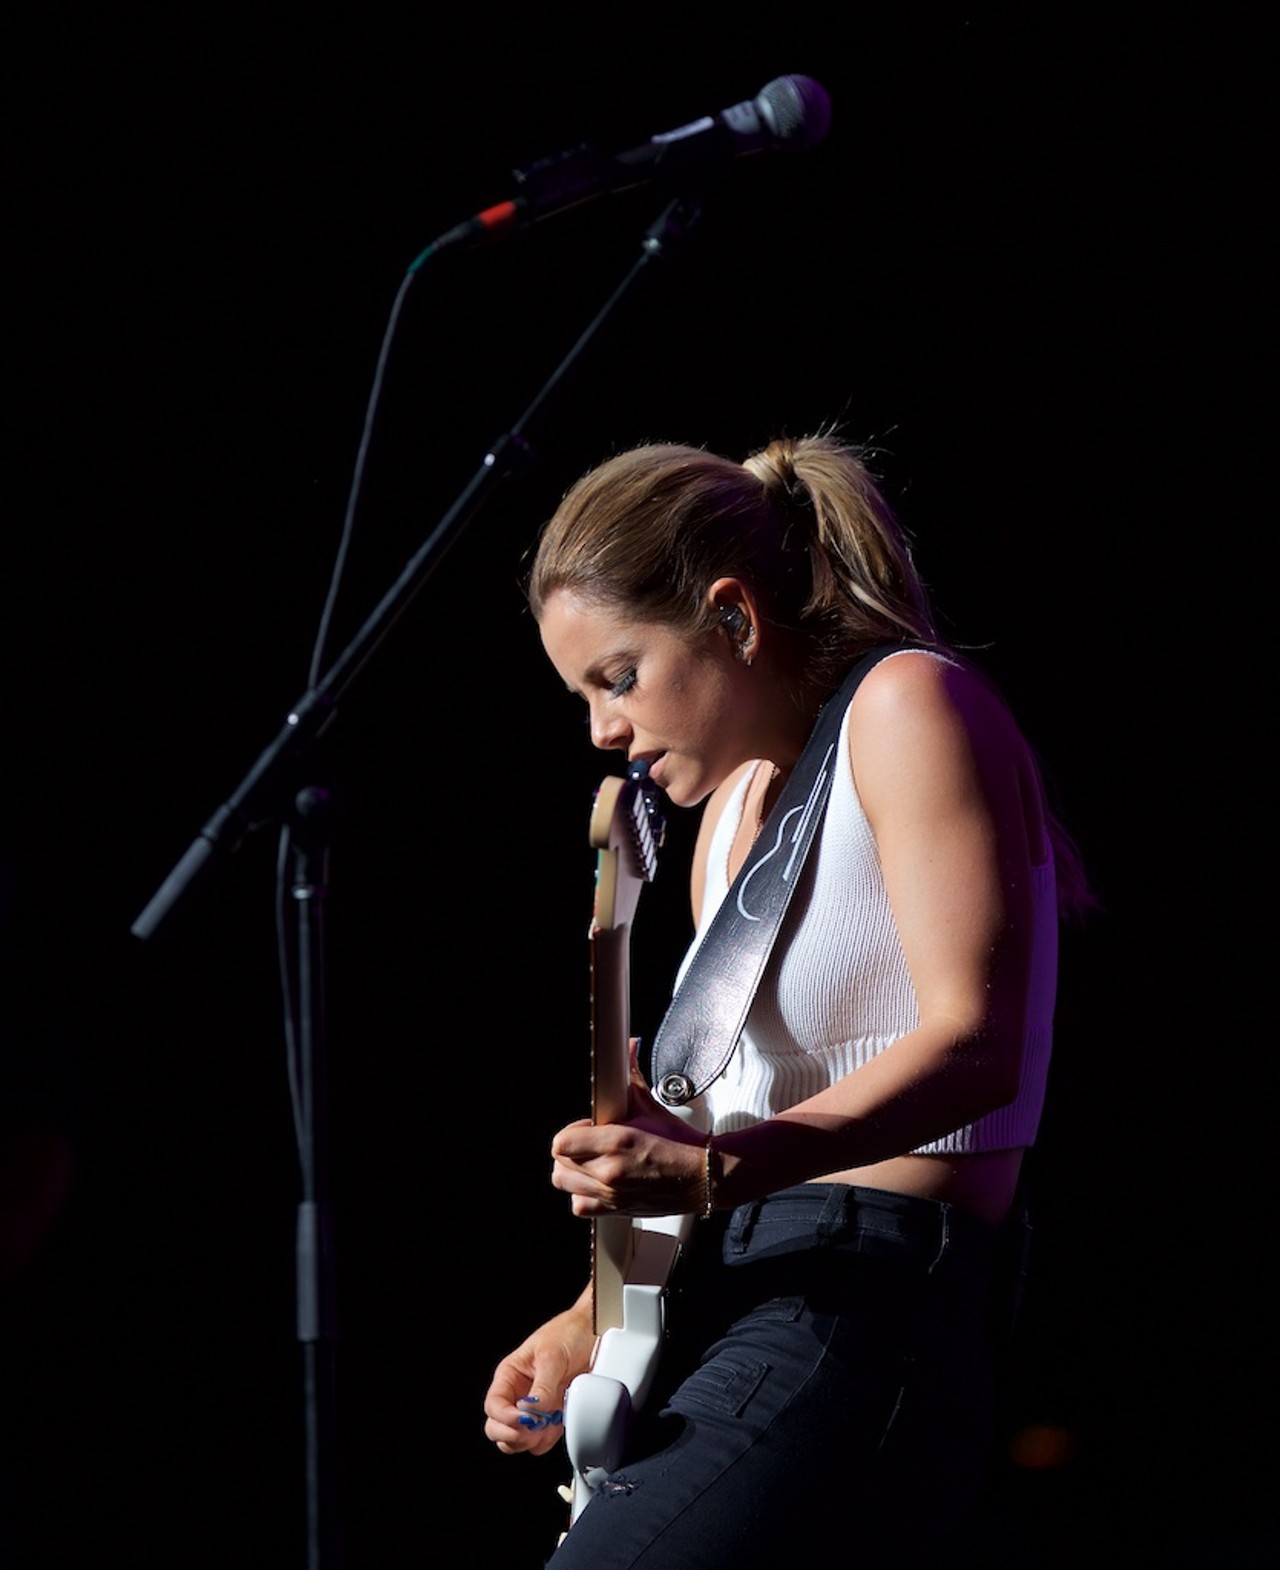 Photos from the Blossom Stop of Brad Paisley's Weekend Warrior Tour